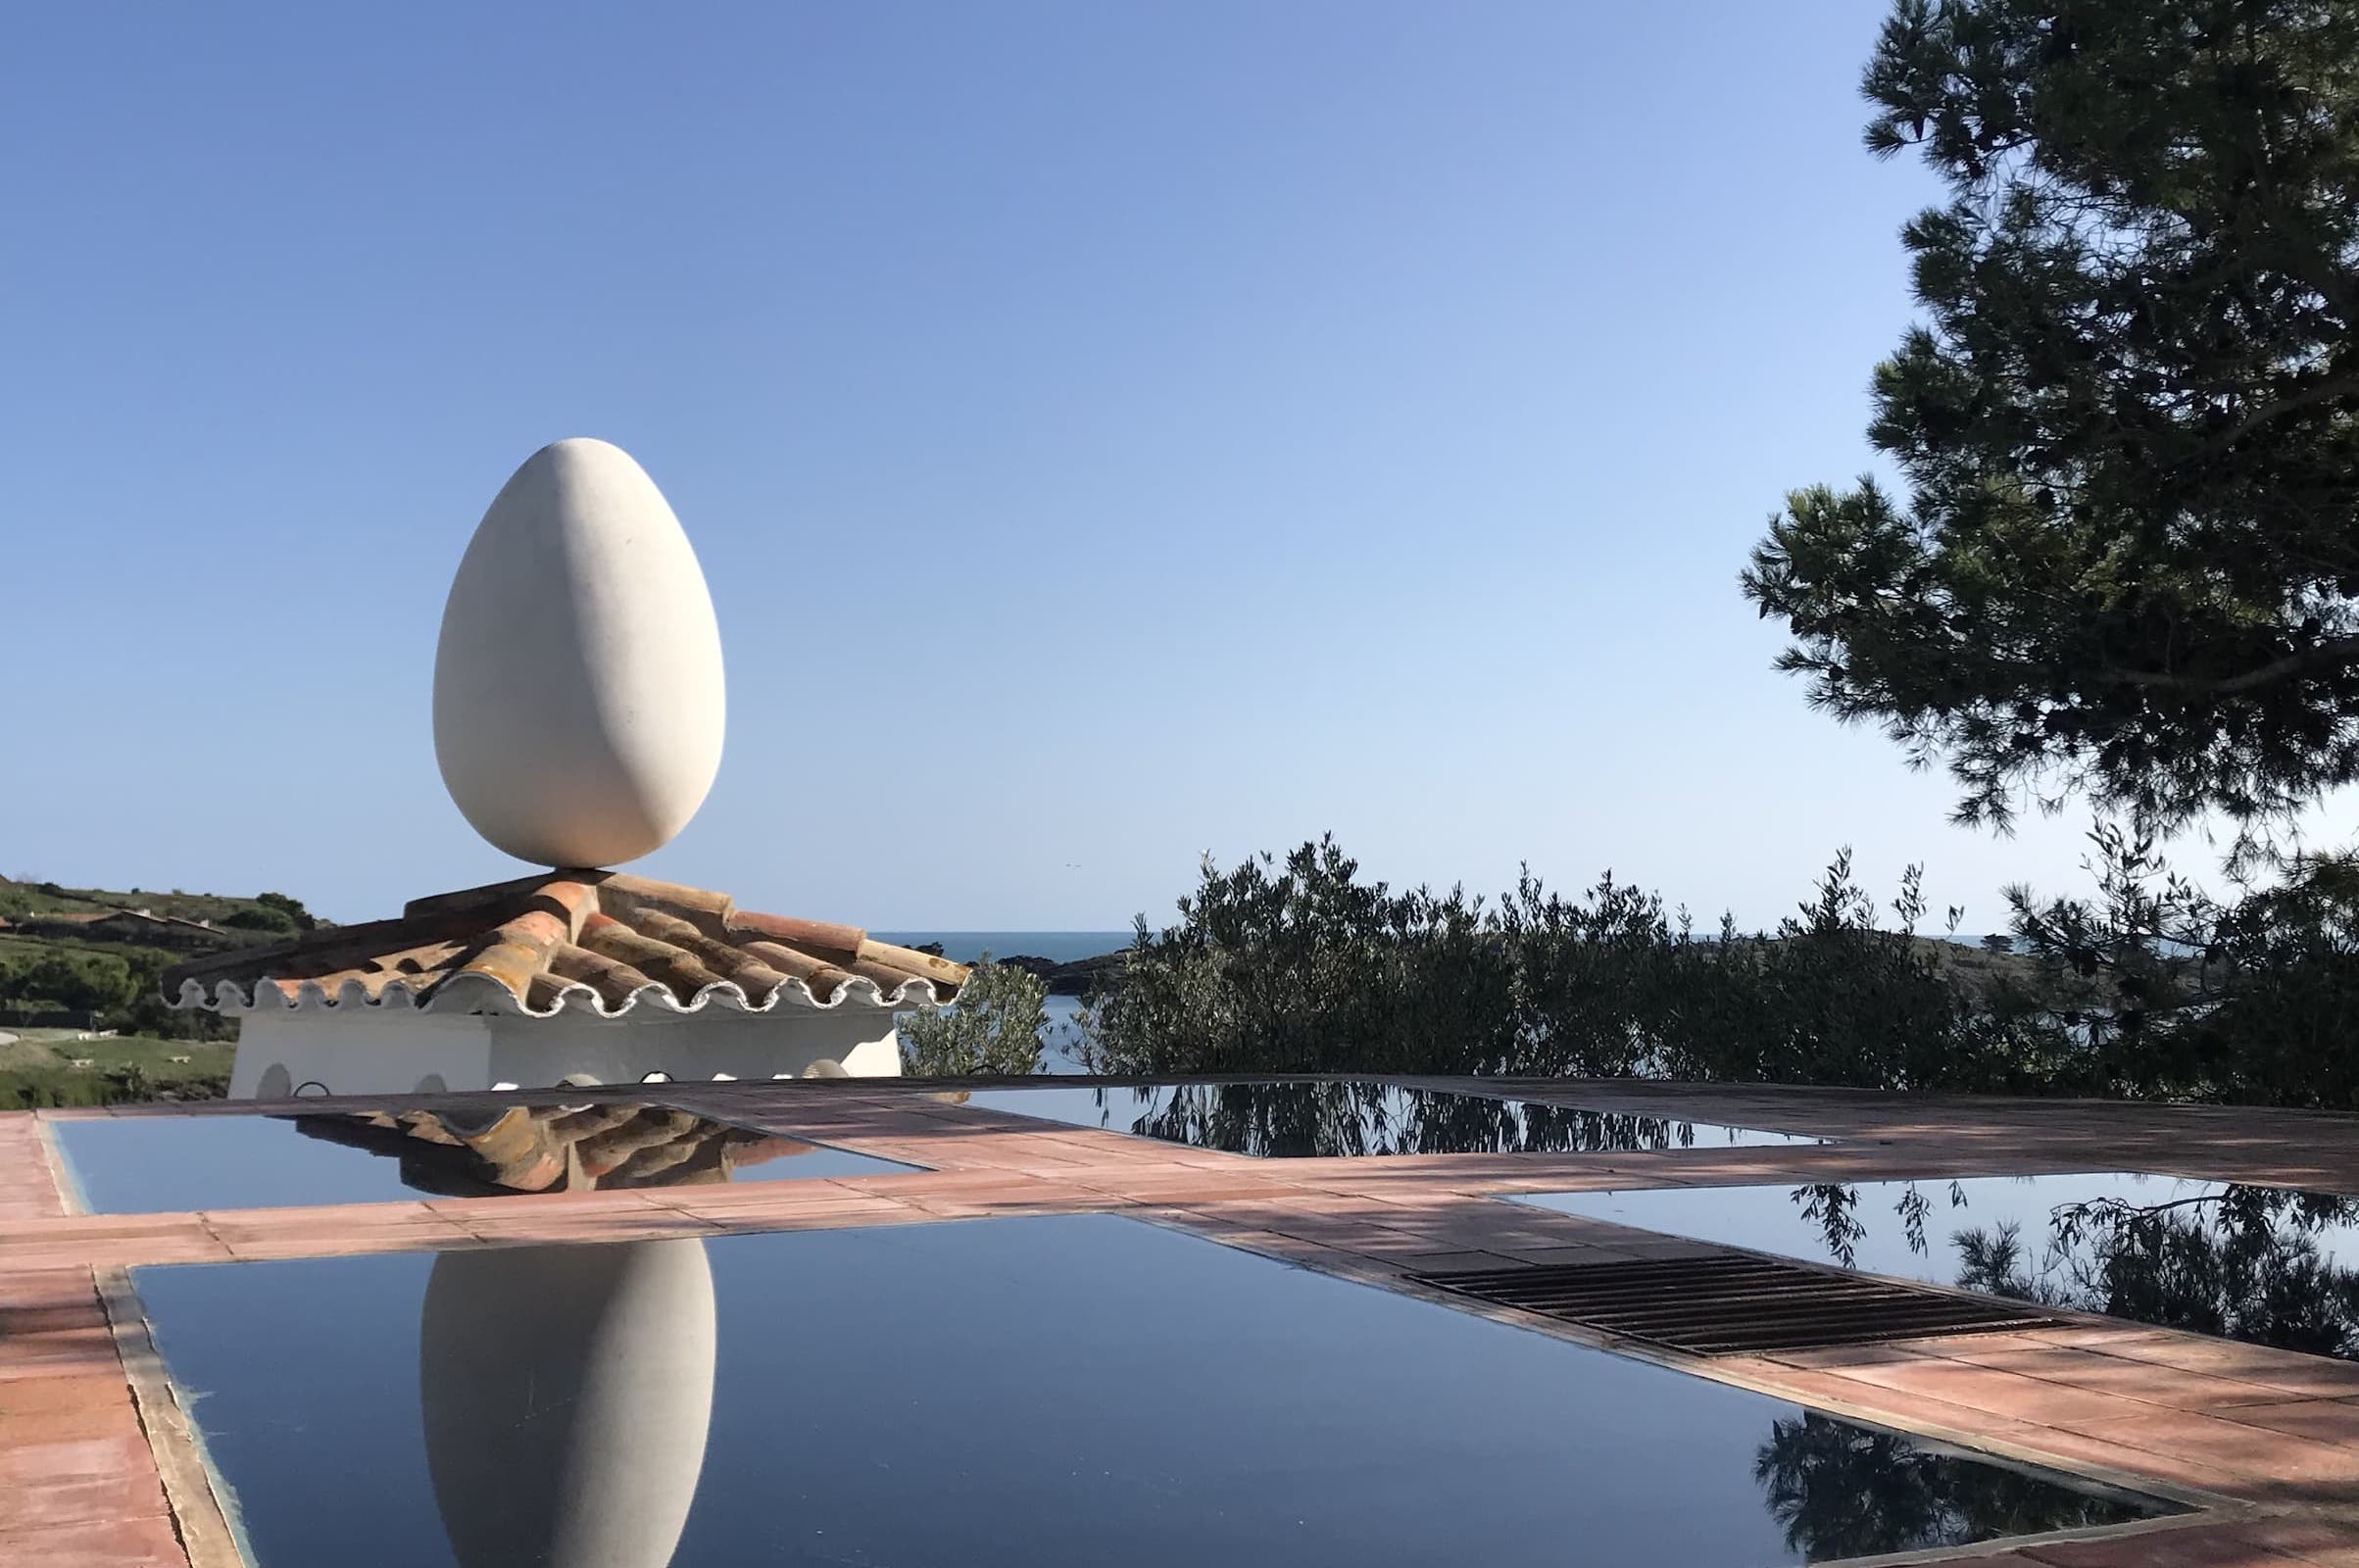 The Dalí House Museum in Portlligat